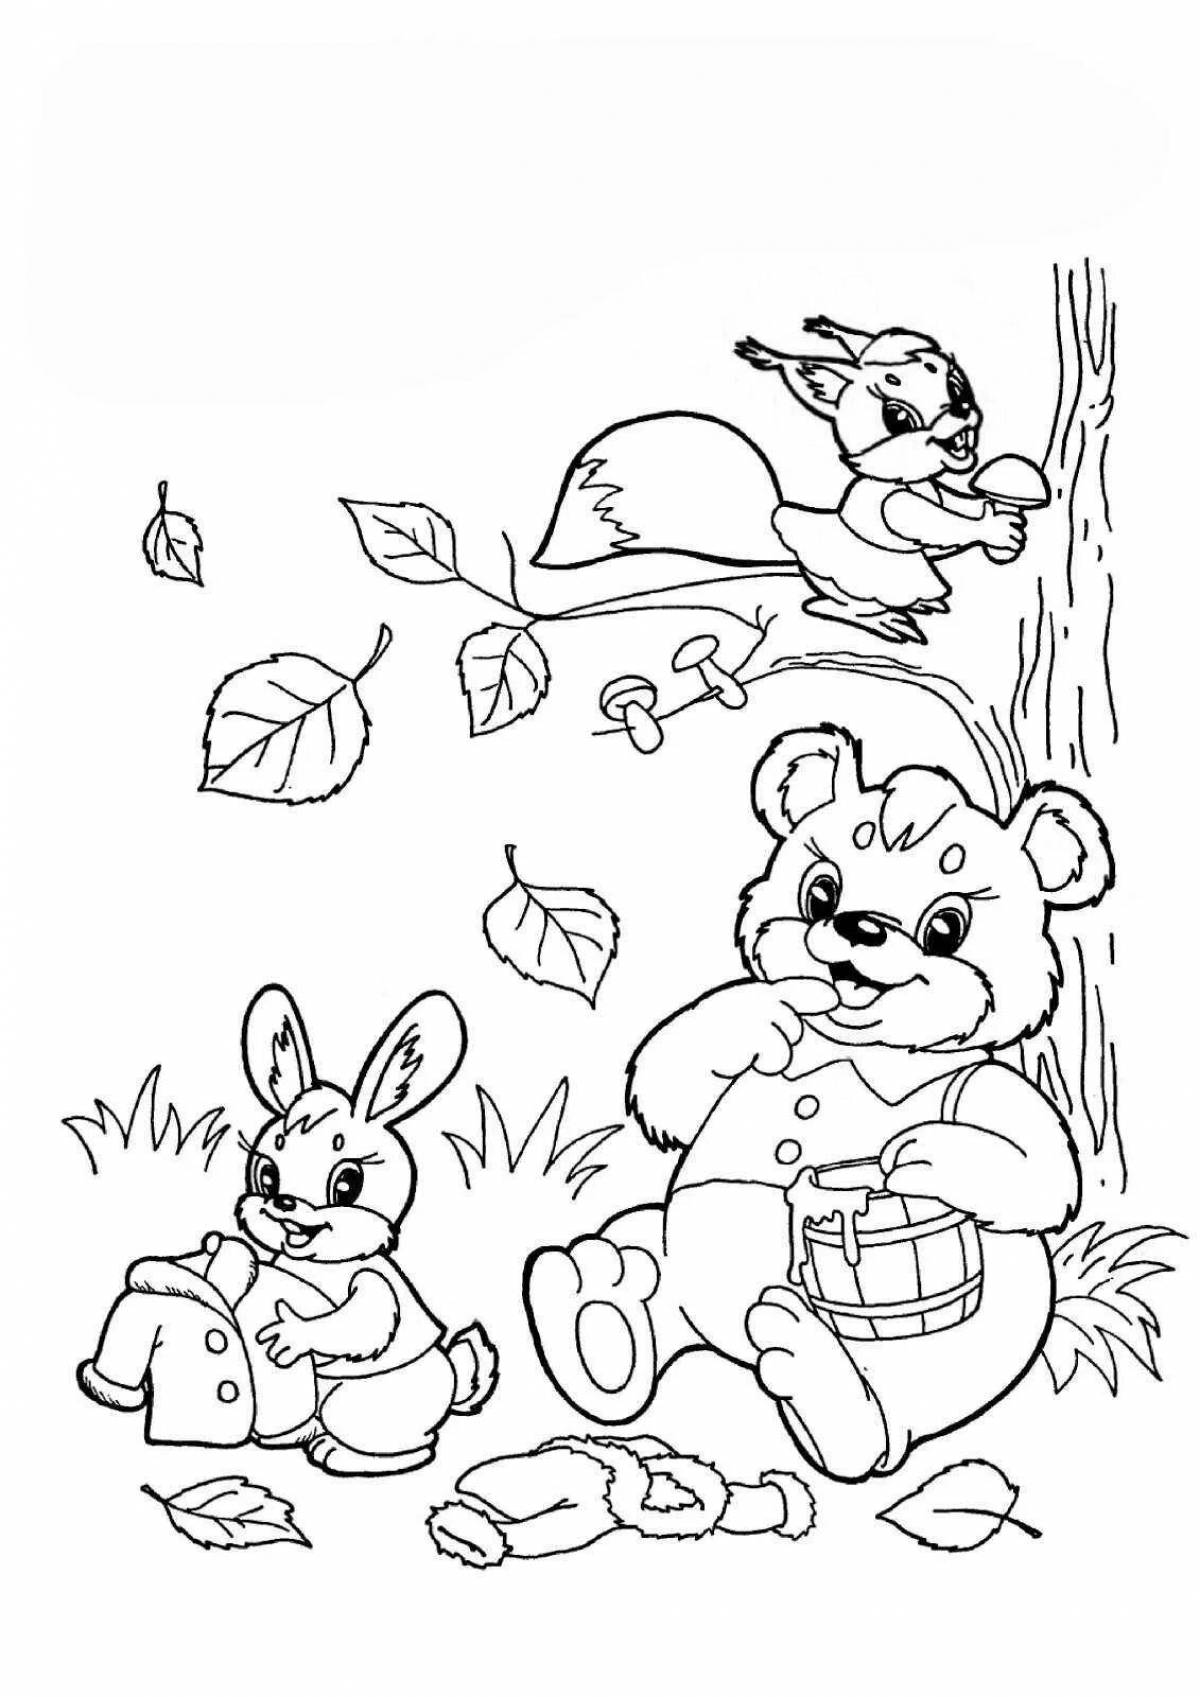 Creative forest animal coloring book for 5-6 year olds